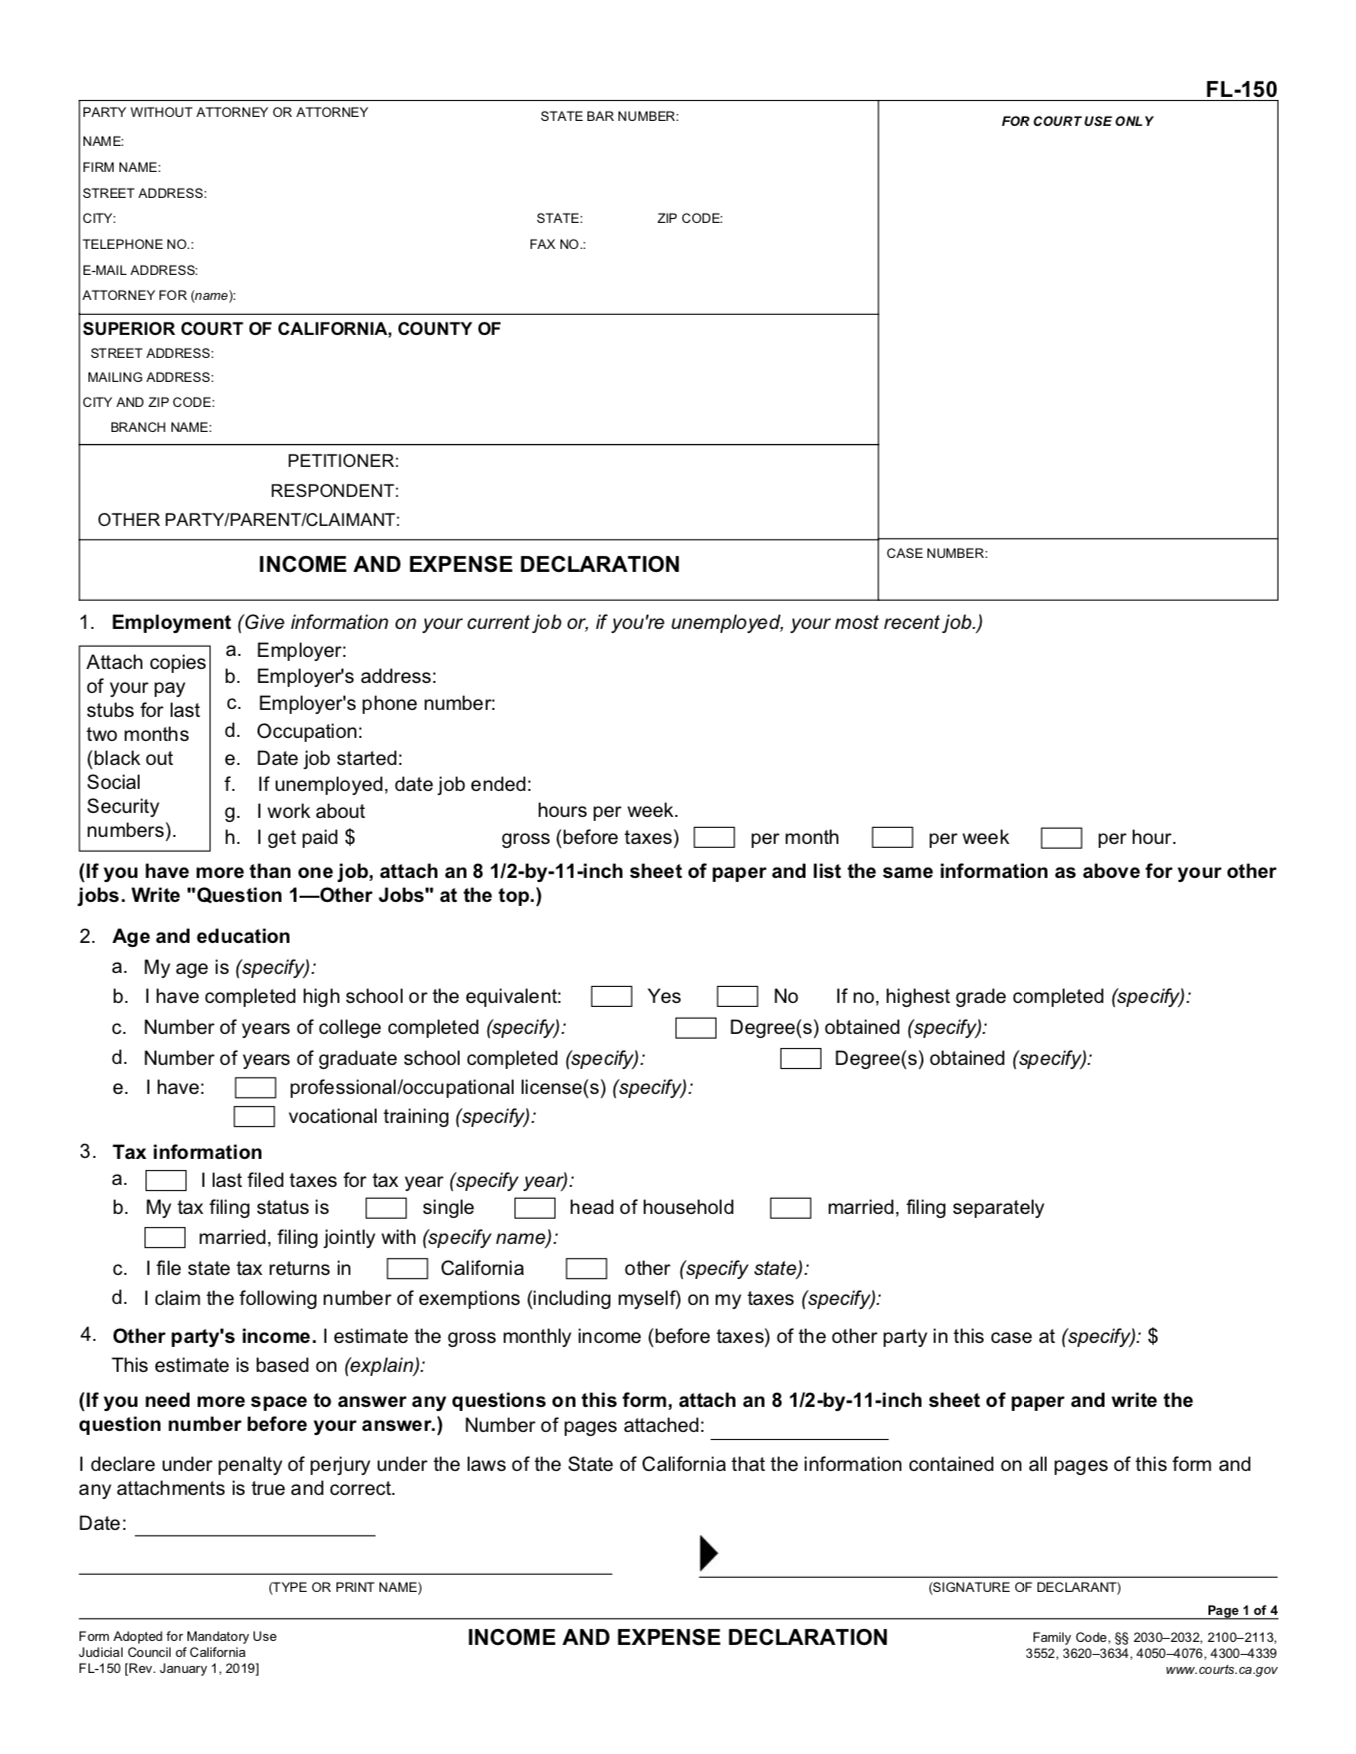 FL-150 income and expense declaration